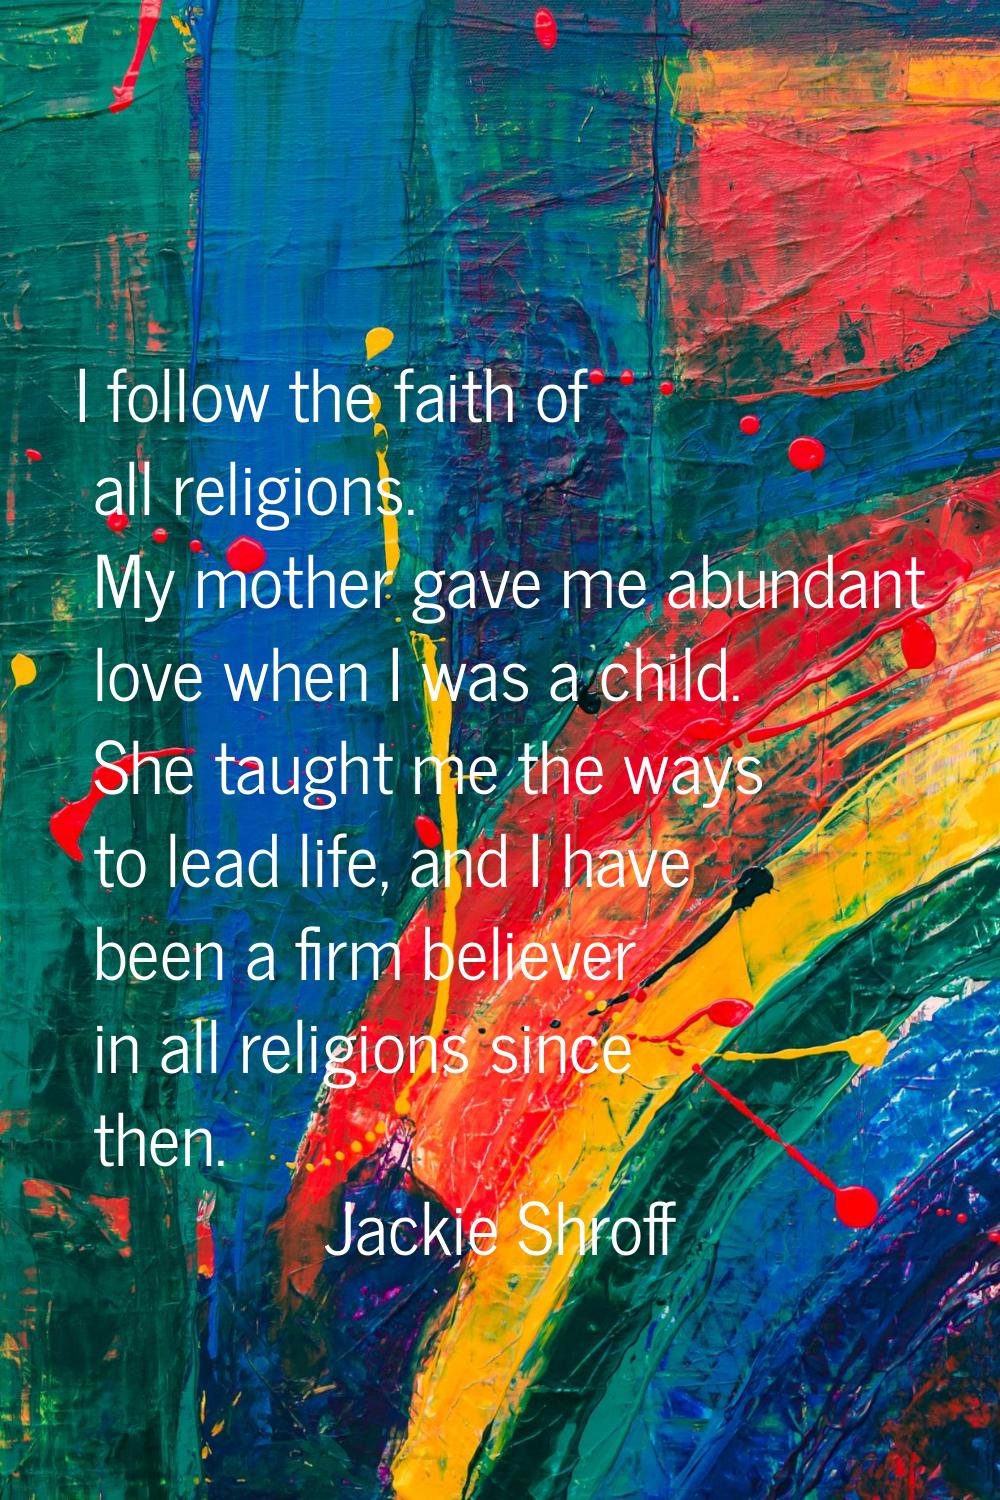 I follow the faith of all religions. My mother gave me abundant love when I was a child. She taught